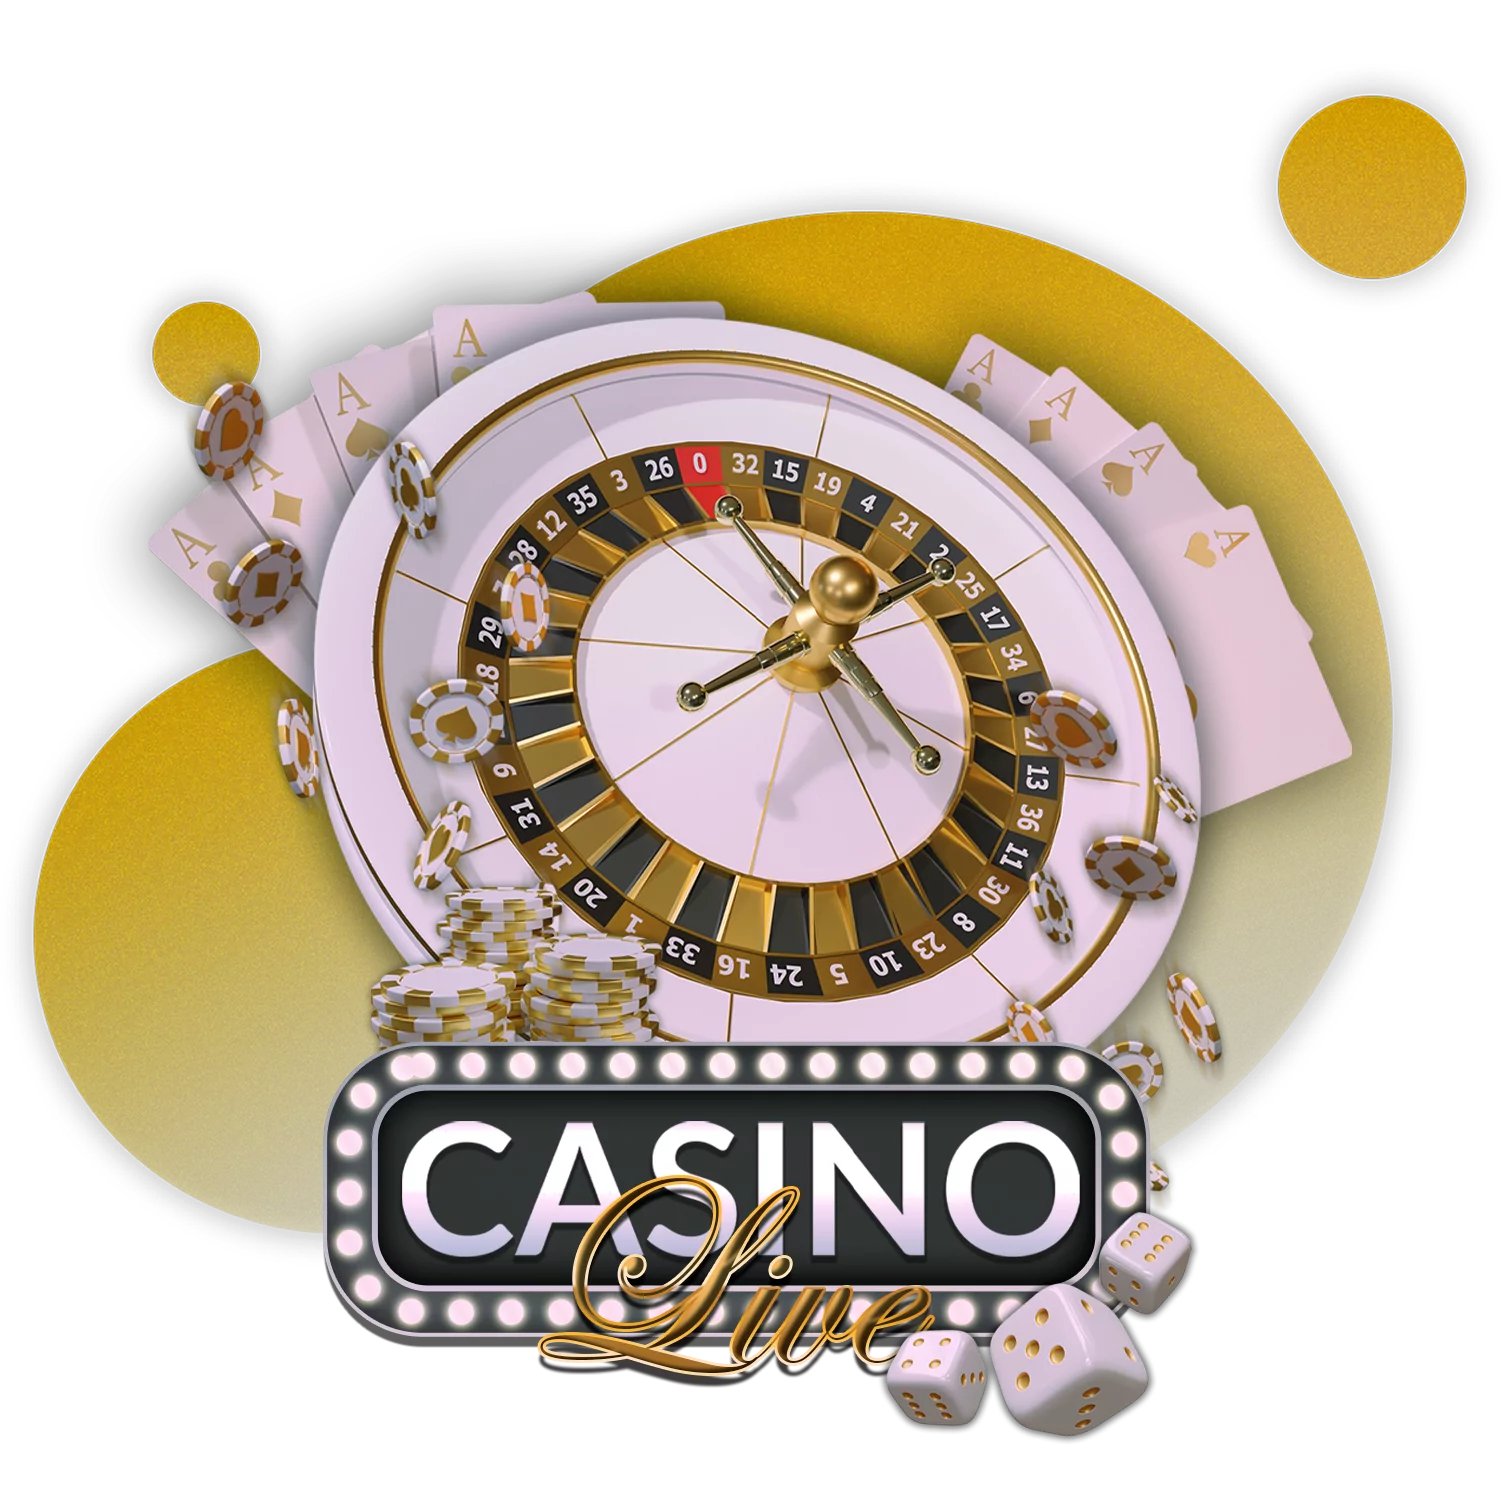 Find out how to play online with live dealers at casino sites.